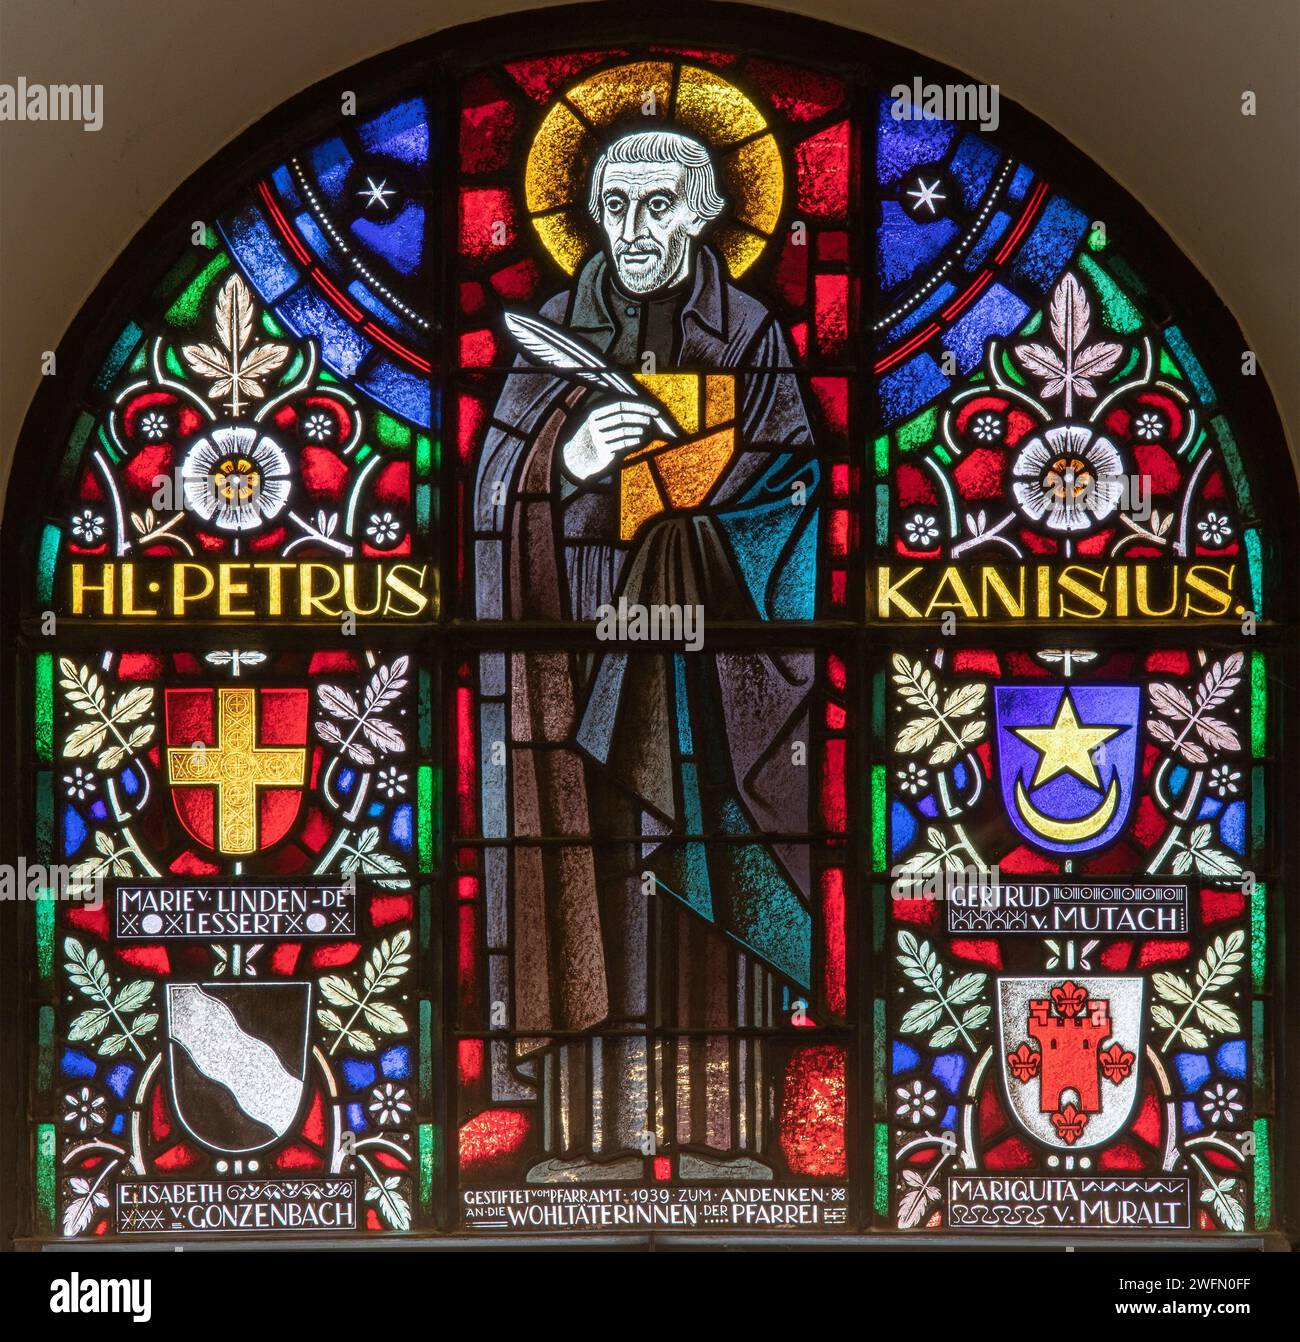 BERN, SWITZERLAND - JUNY 27, 2022: The and St. Peter Canisius on the stained glass in the church Dreifaltigkeitskirche by A. Schweri (1938). Stock Photo